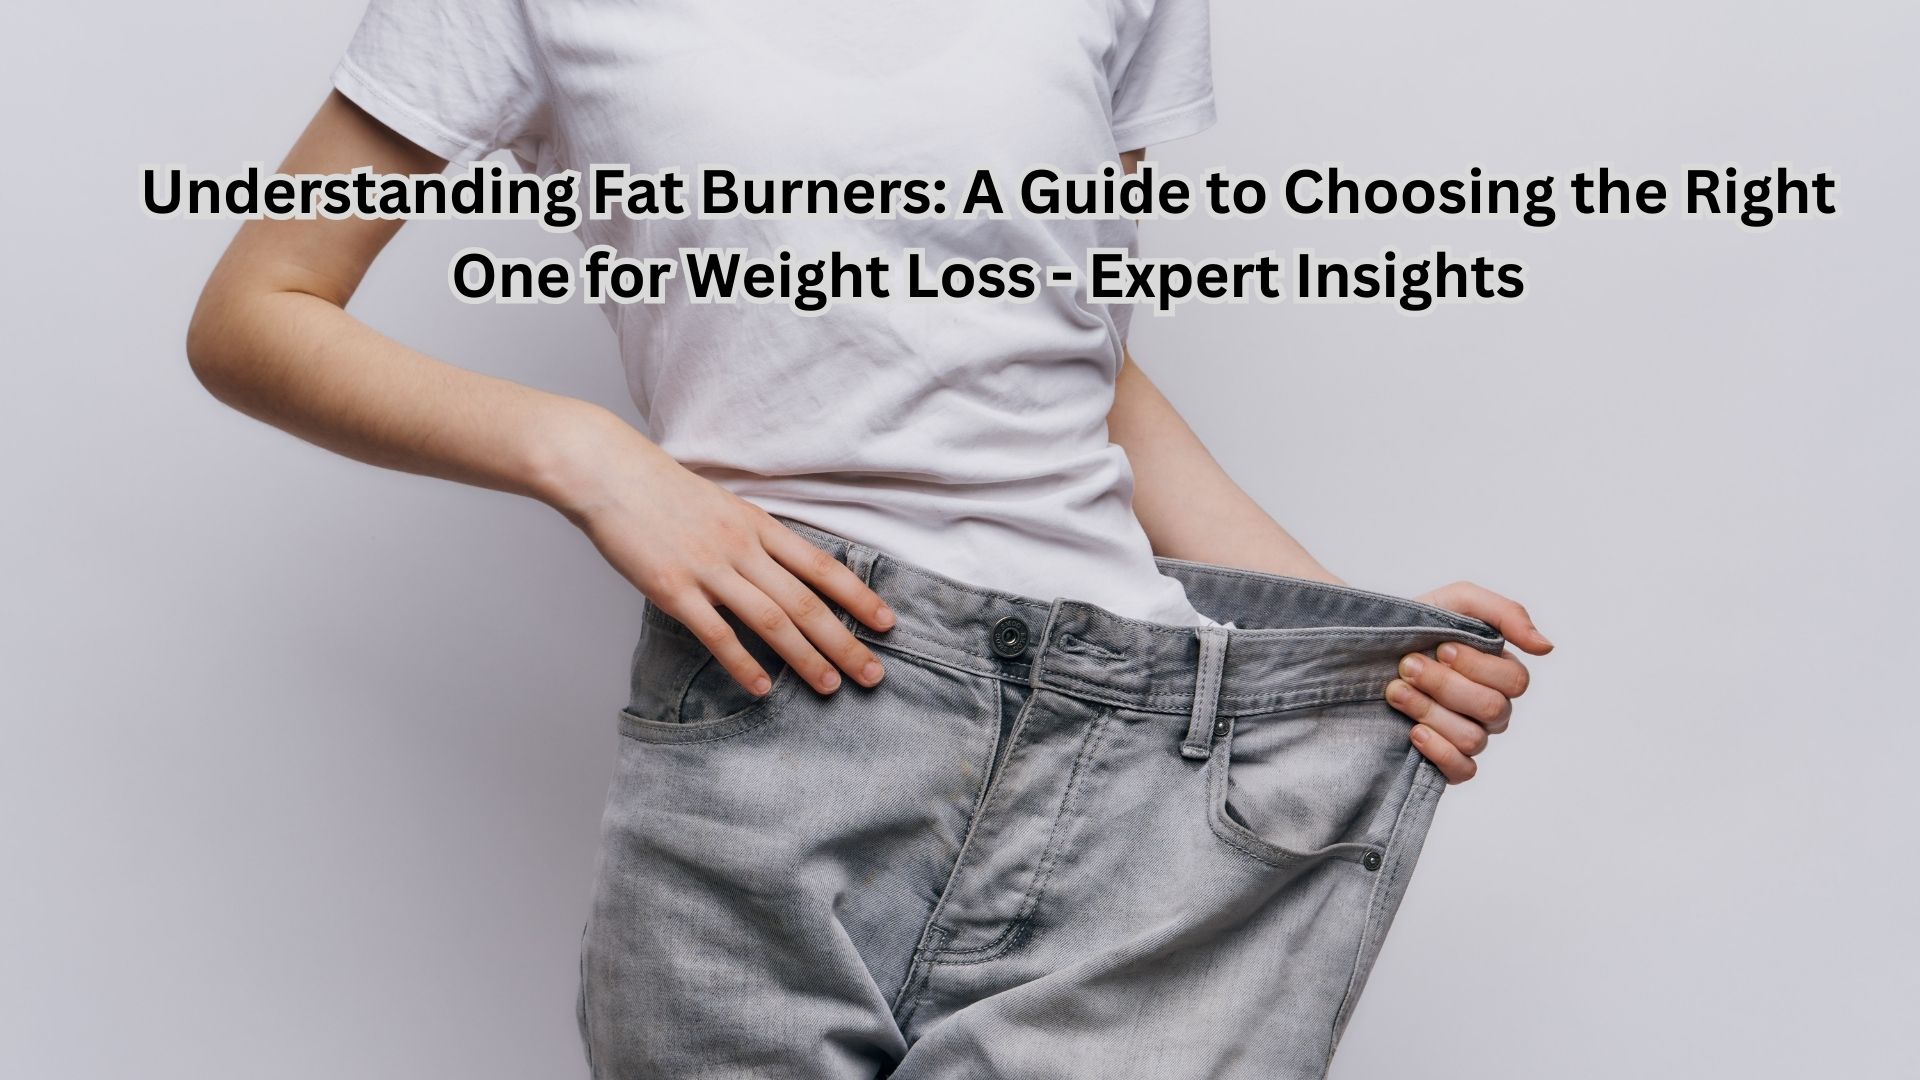 Understanding Fat Burners: A Guide to Choosing the Right One for Weight Loss - Expert Insights